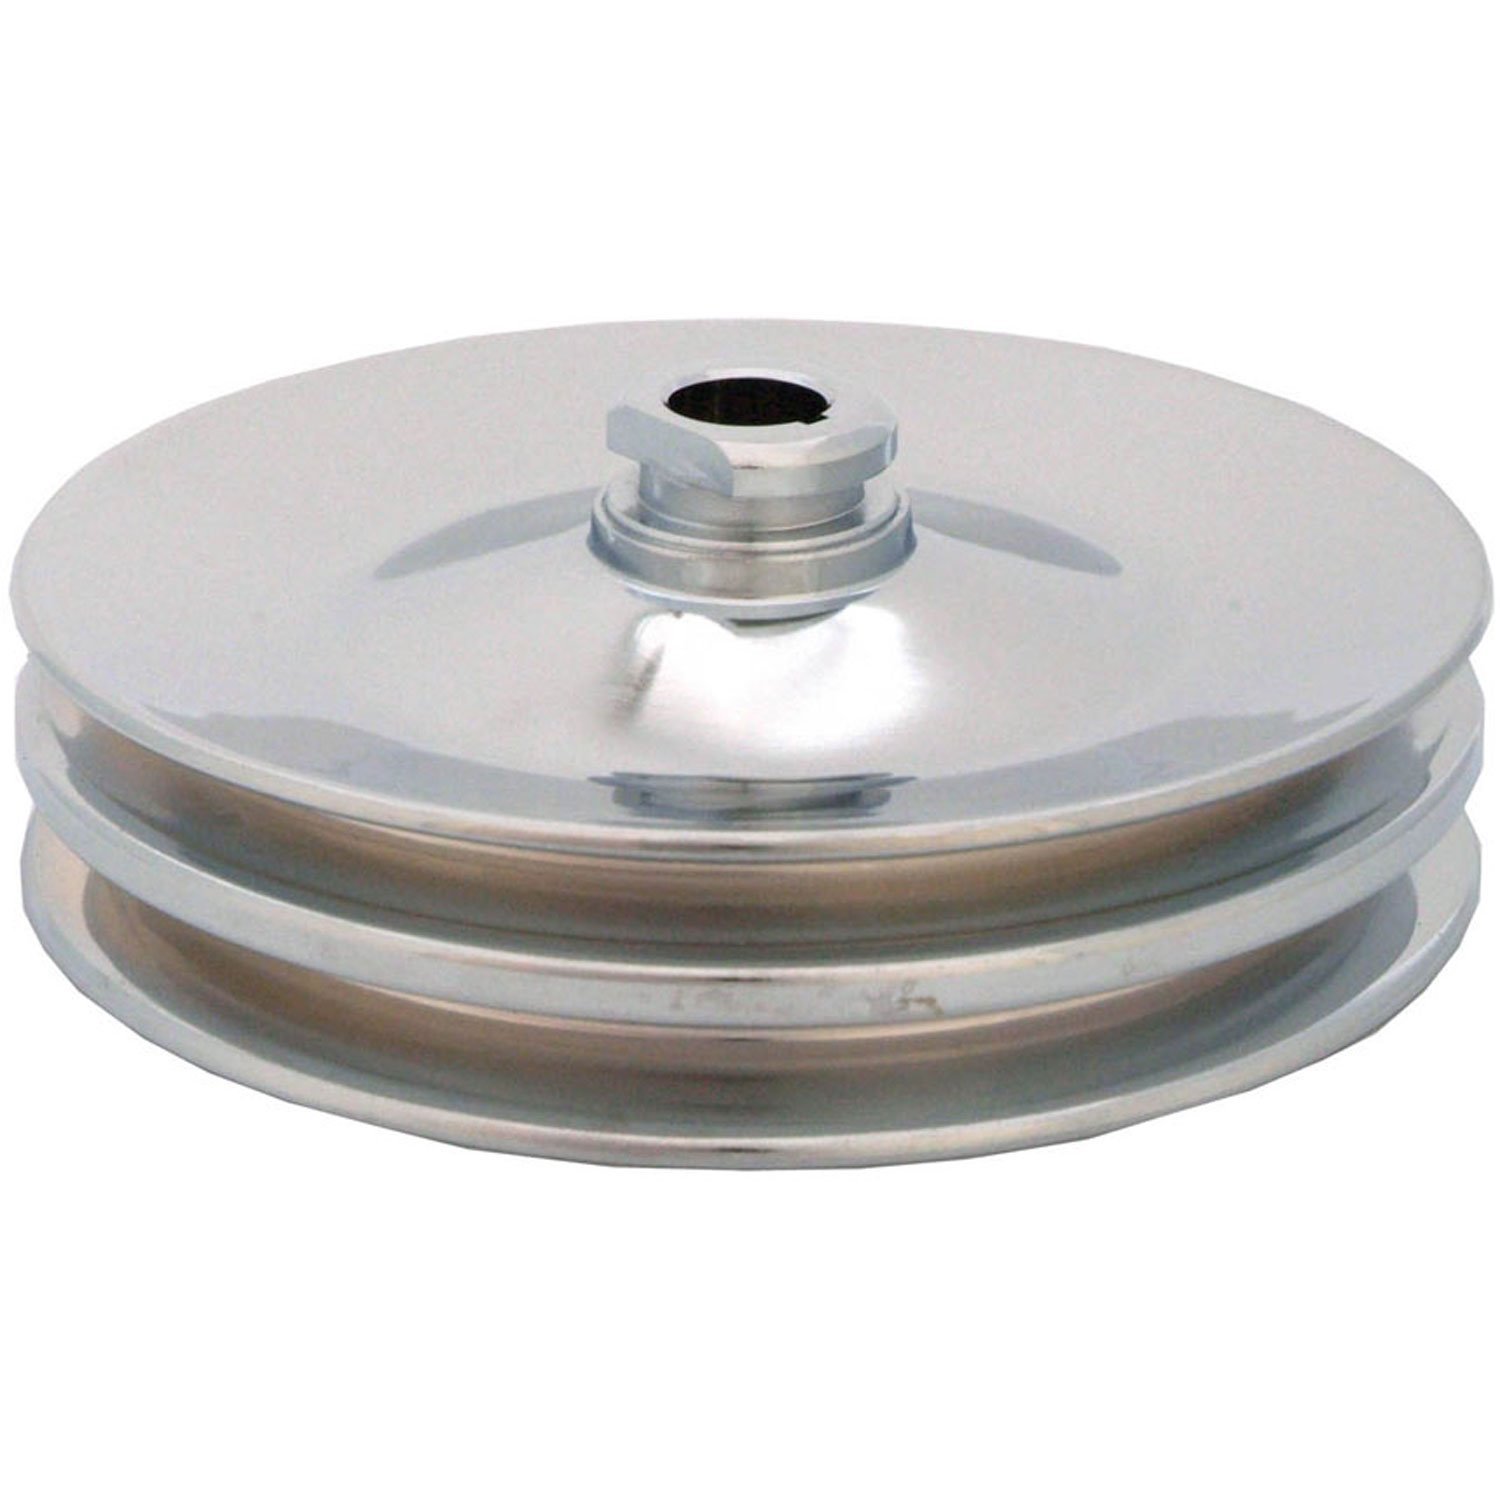 Power Steering Pulley Fits up to 1984 GM vehicles with keyway style pump